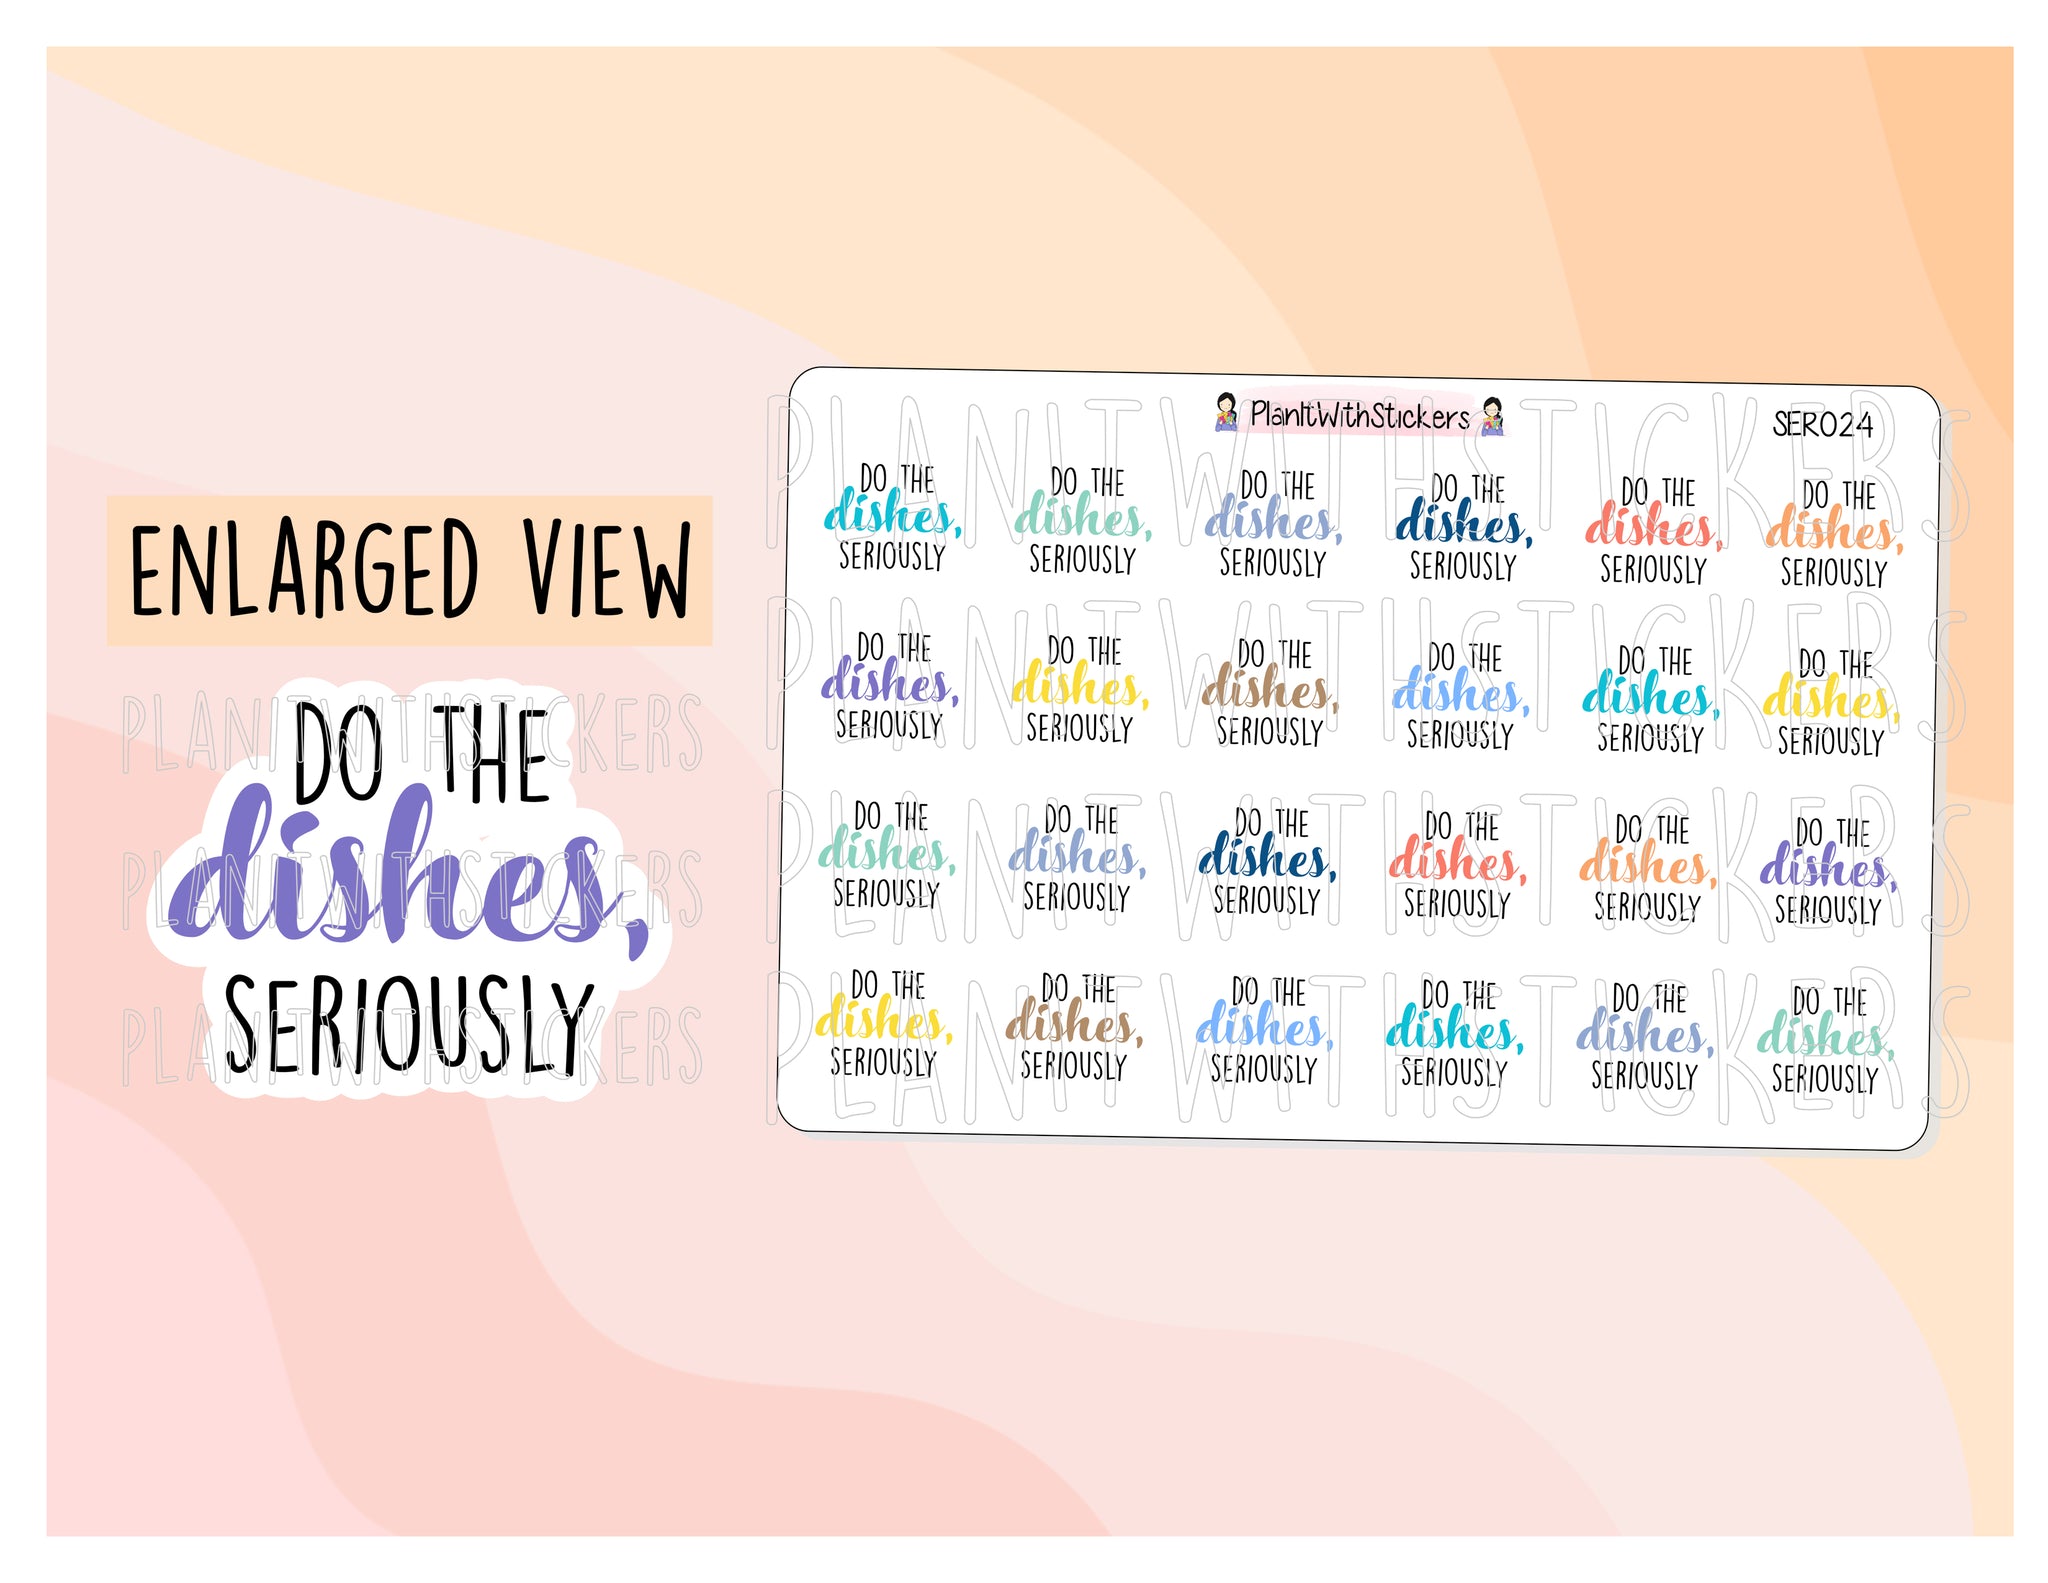 SER024 | Do The Dishes, Seriously Sticker SERIOUSLY Series Sassy Quotes Planner Stickers for your planner